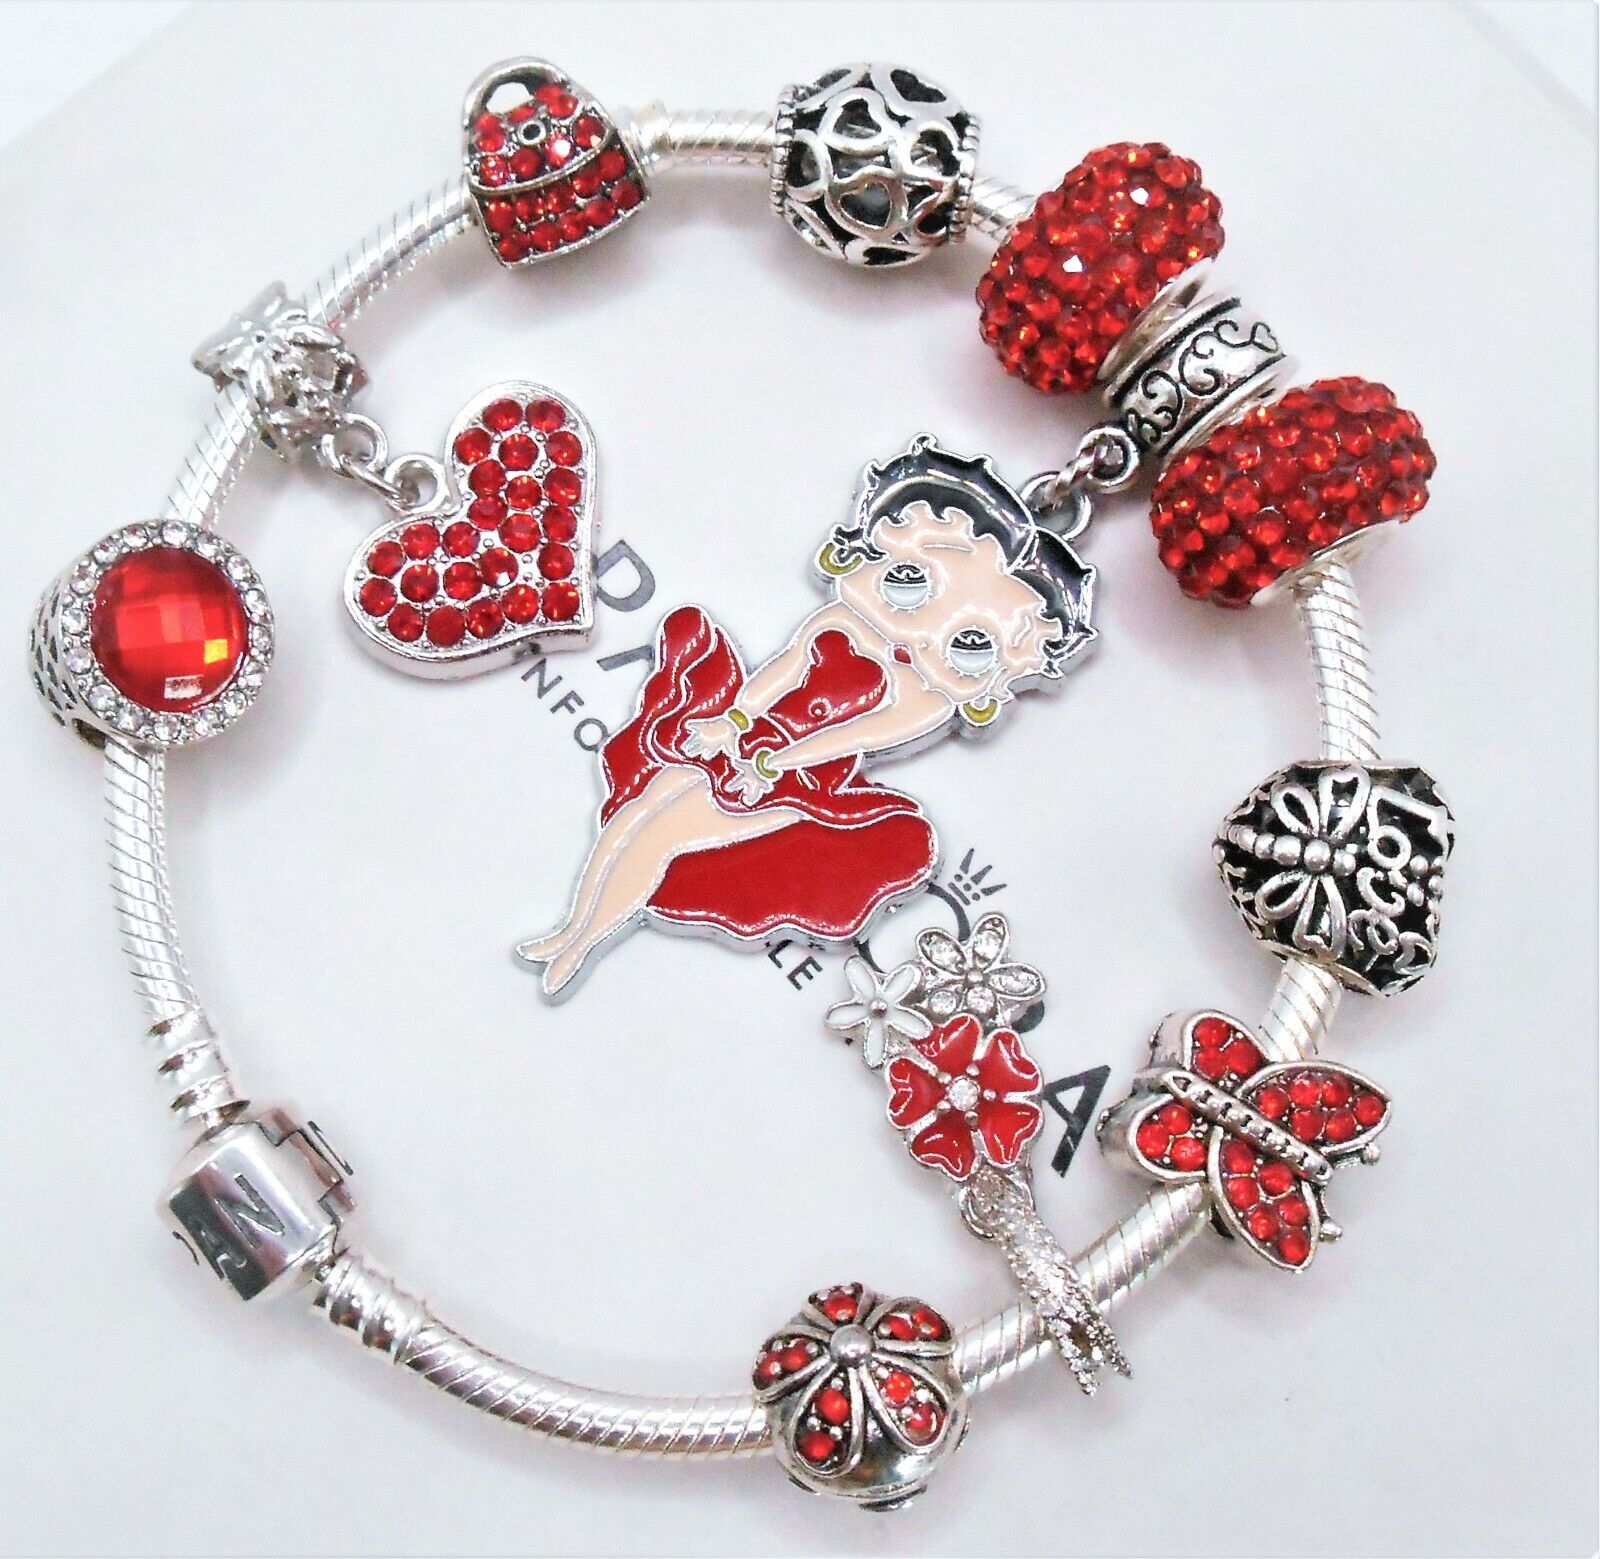 PANDORA SILVER CHARM BRACELET WITH RED EUROPEAN CHARMS &amp; GIFT BOX! |